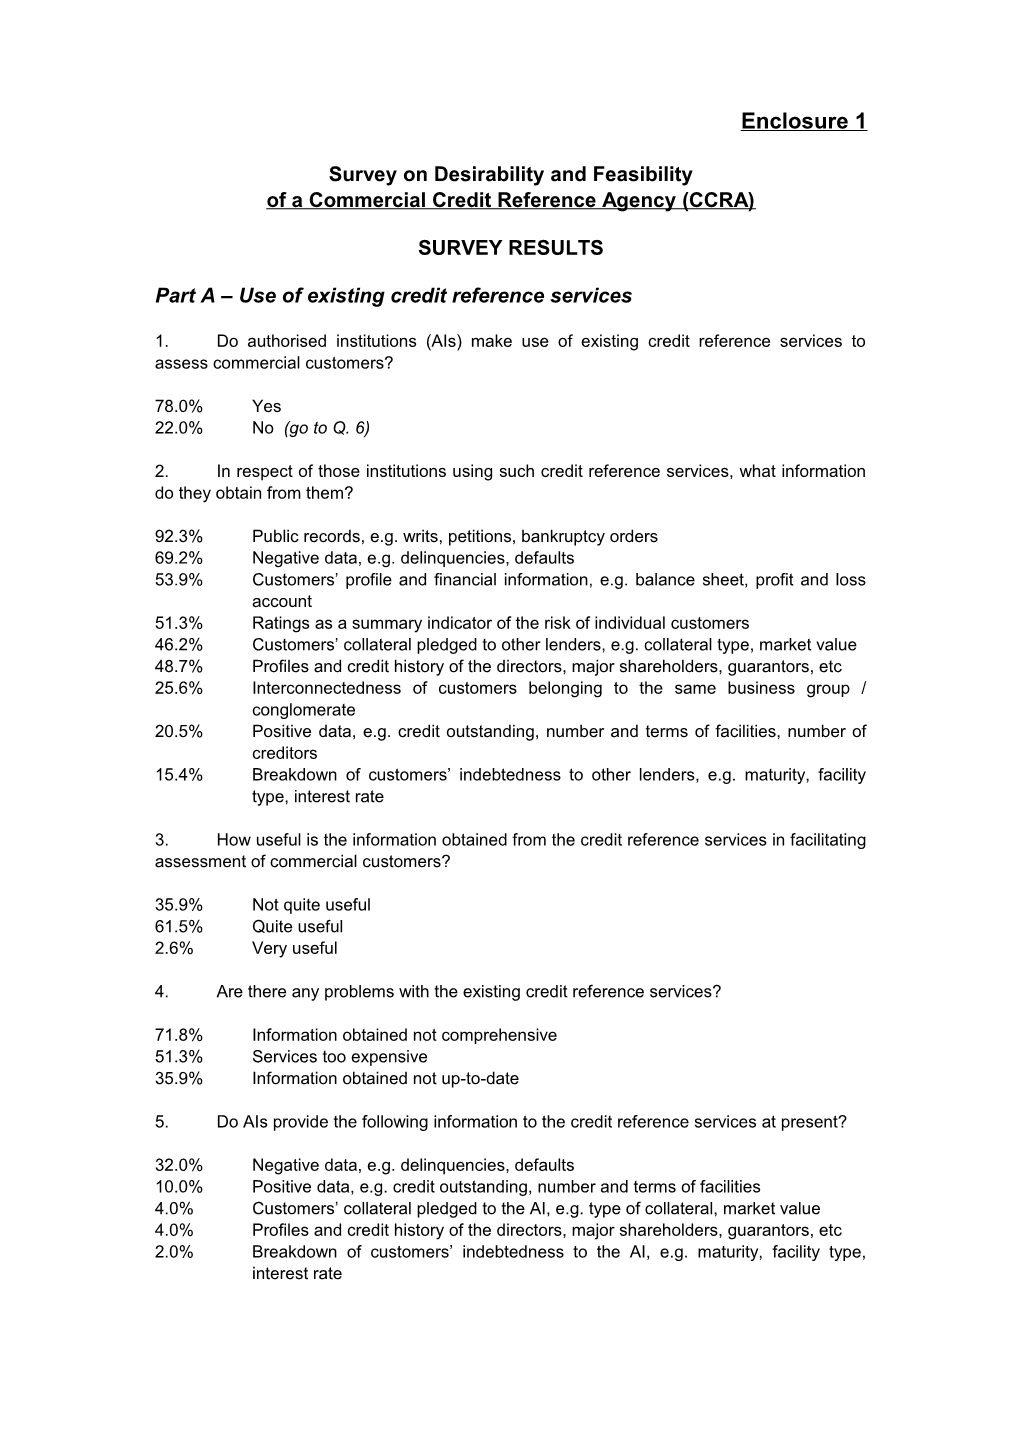 Survey on Desirability and Feasibility